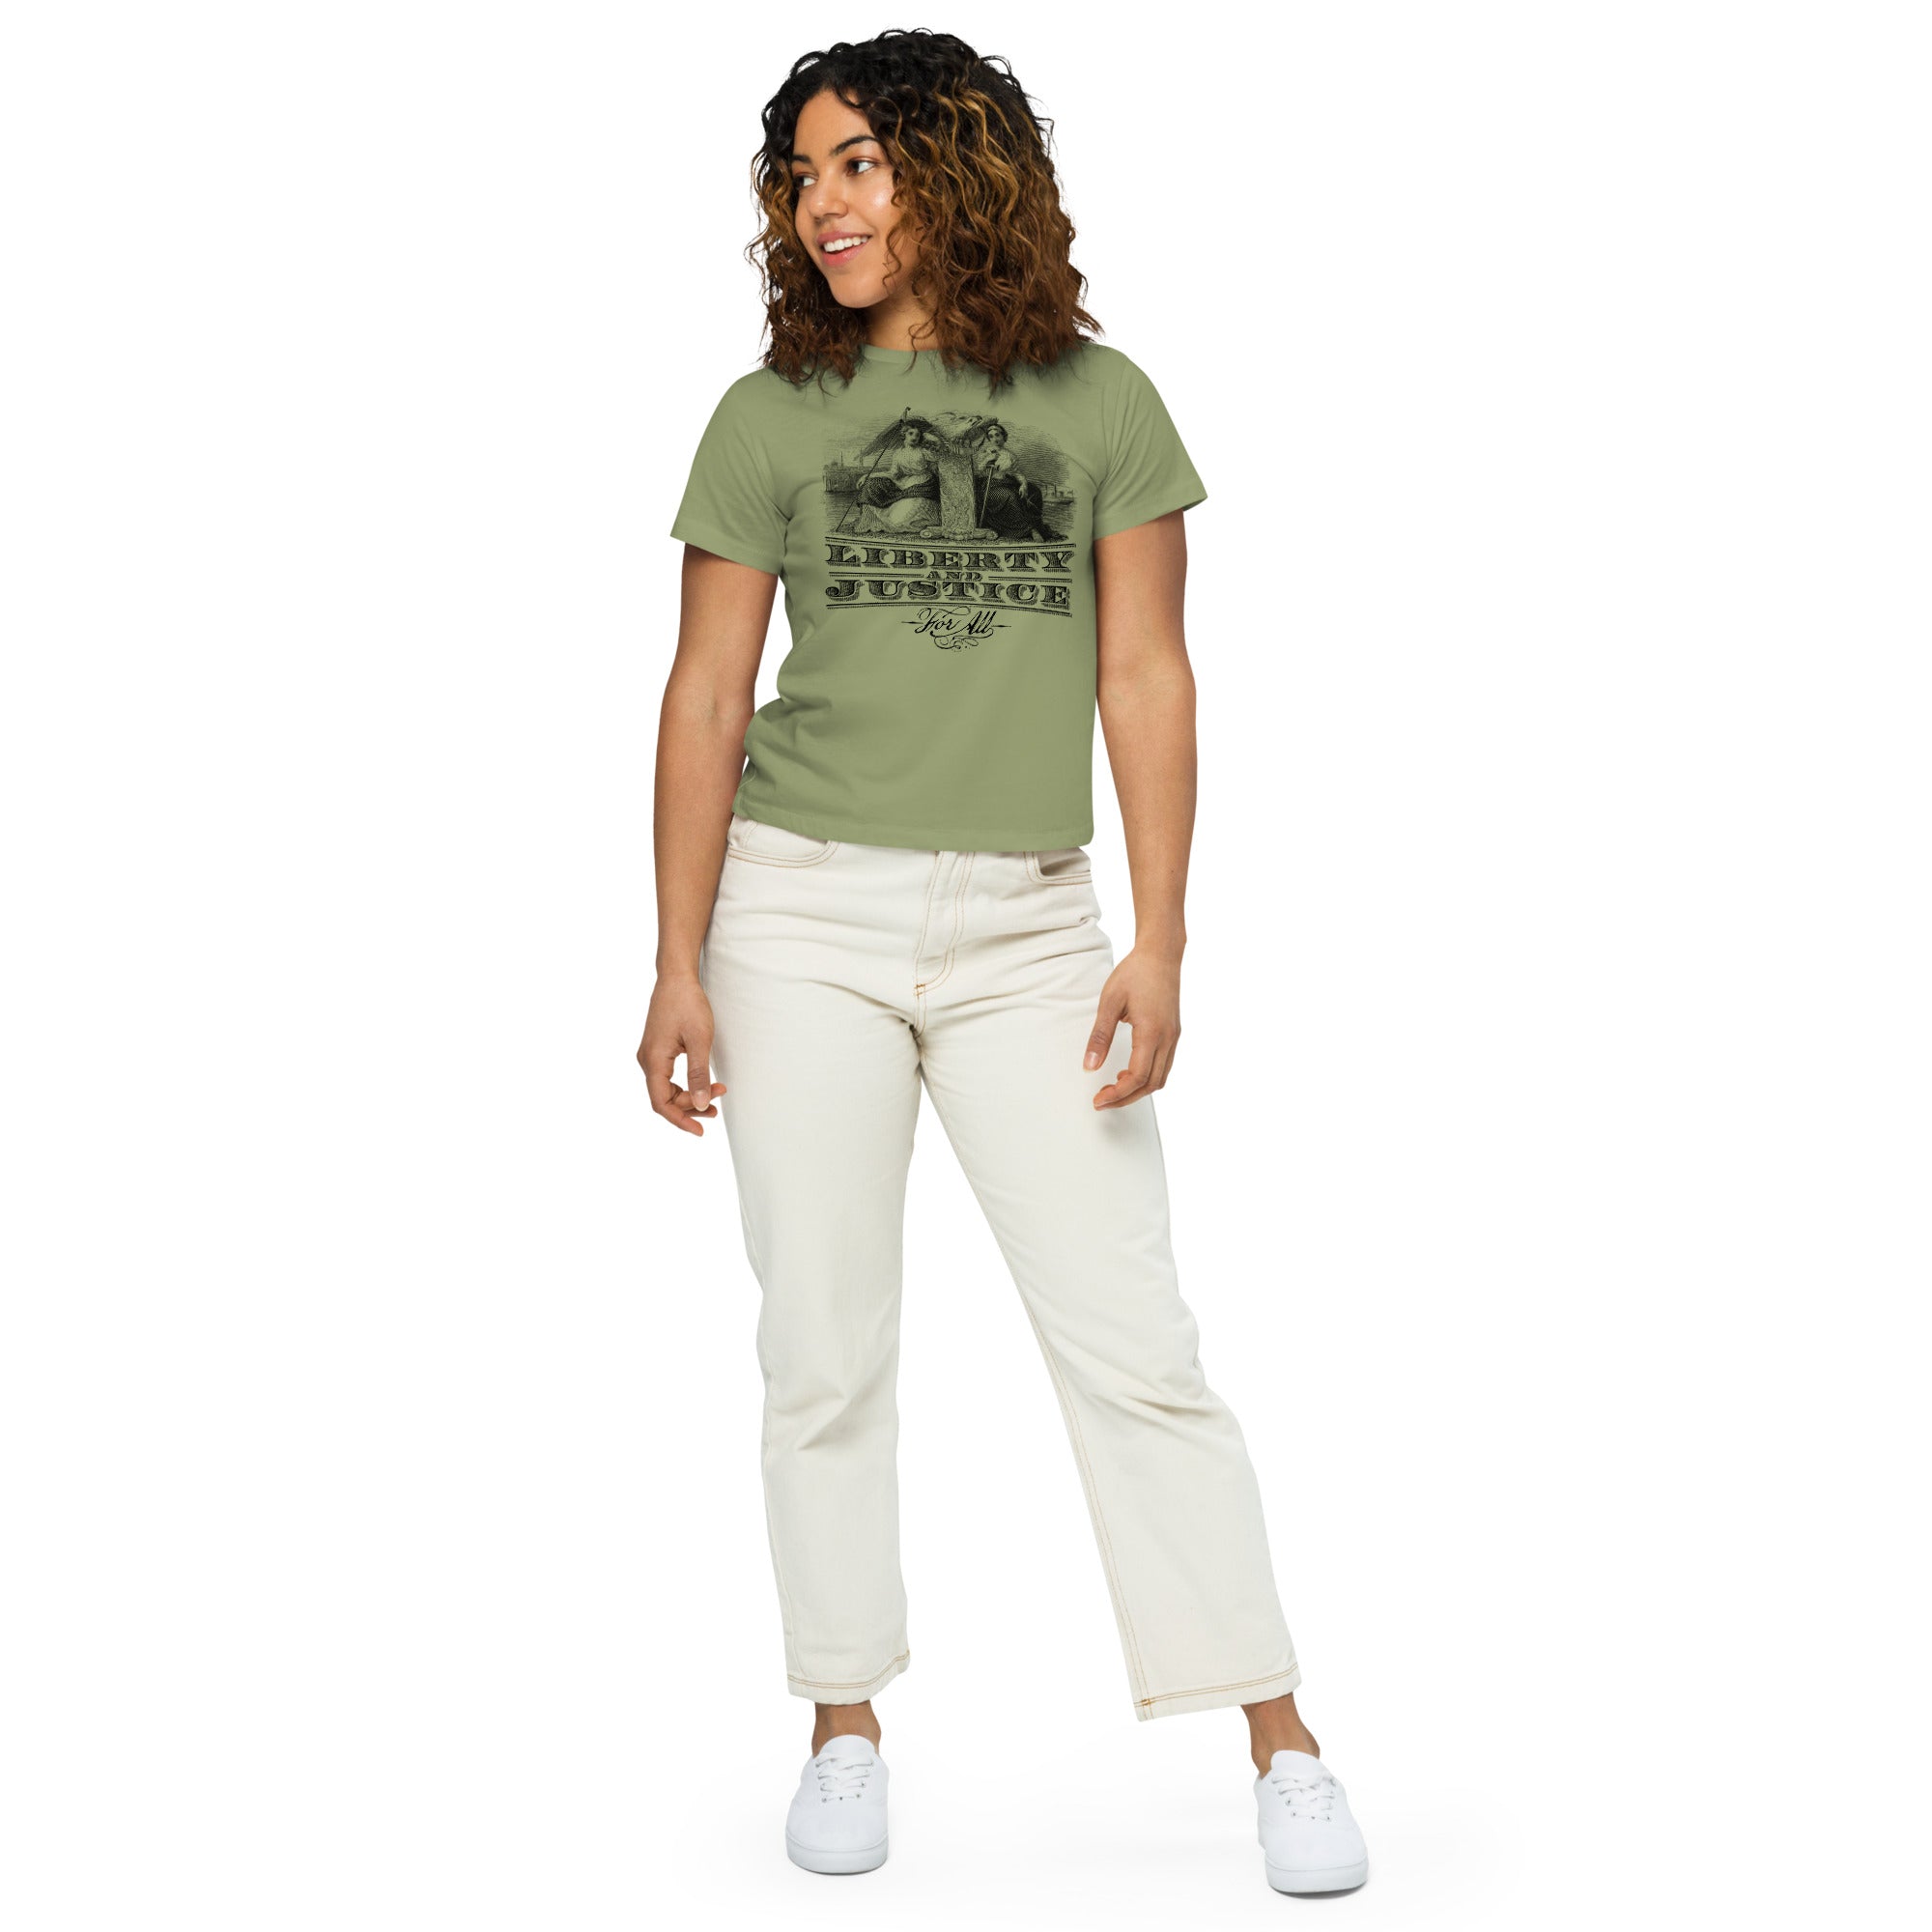 Liberty and Justice Women’s high-waisted t-shirt